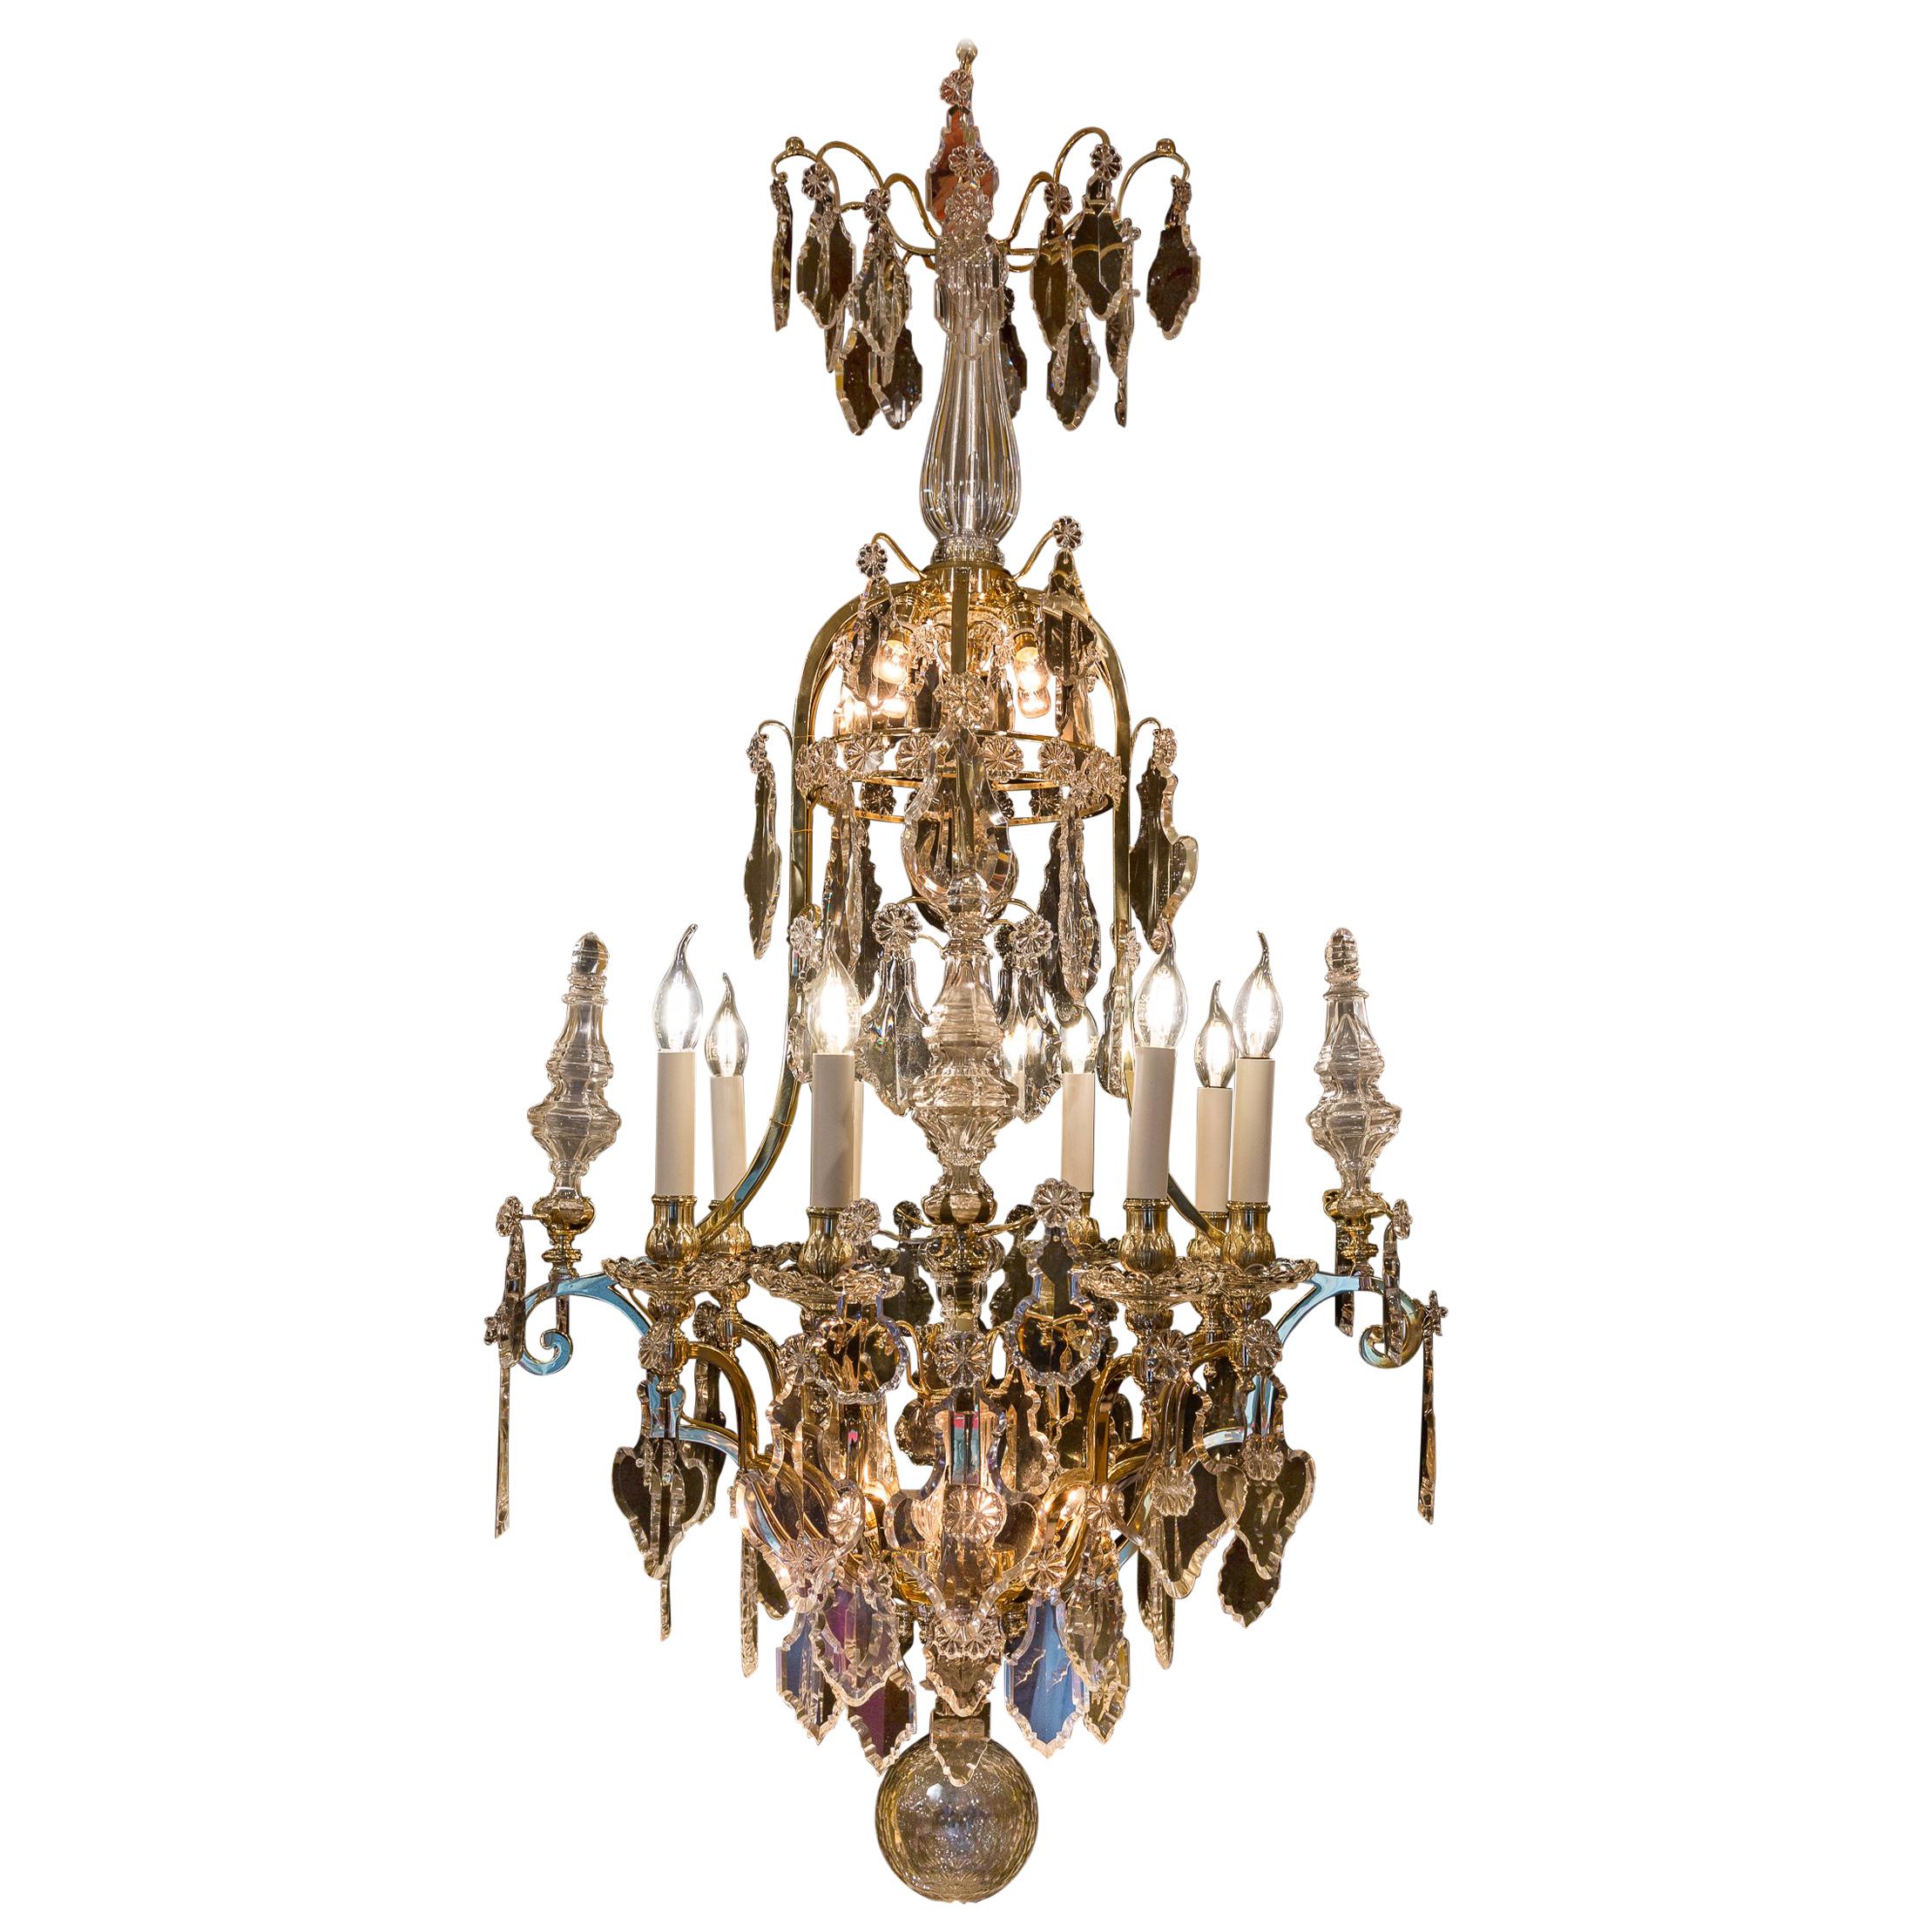 Cristalleries de Baccarat, French Louis XIV Style, Gilt Bronze and Chandelier